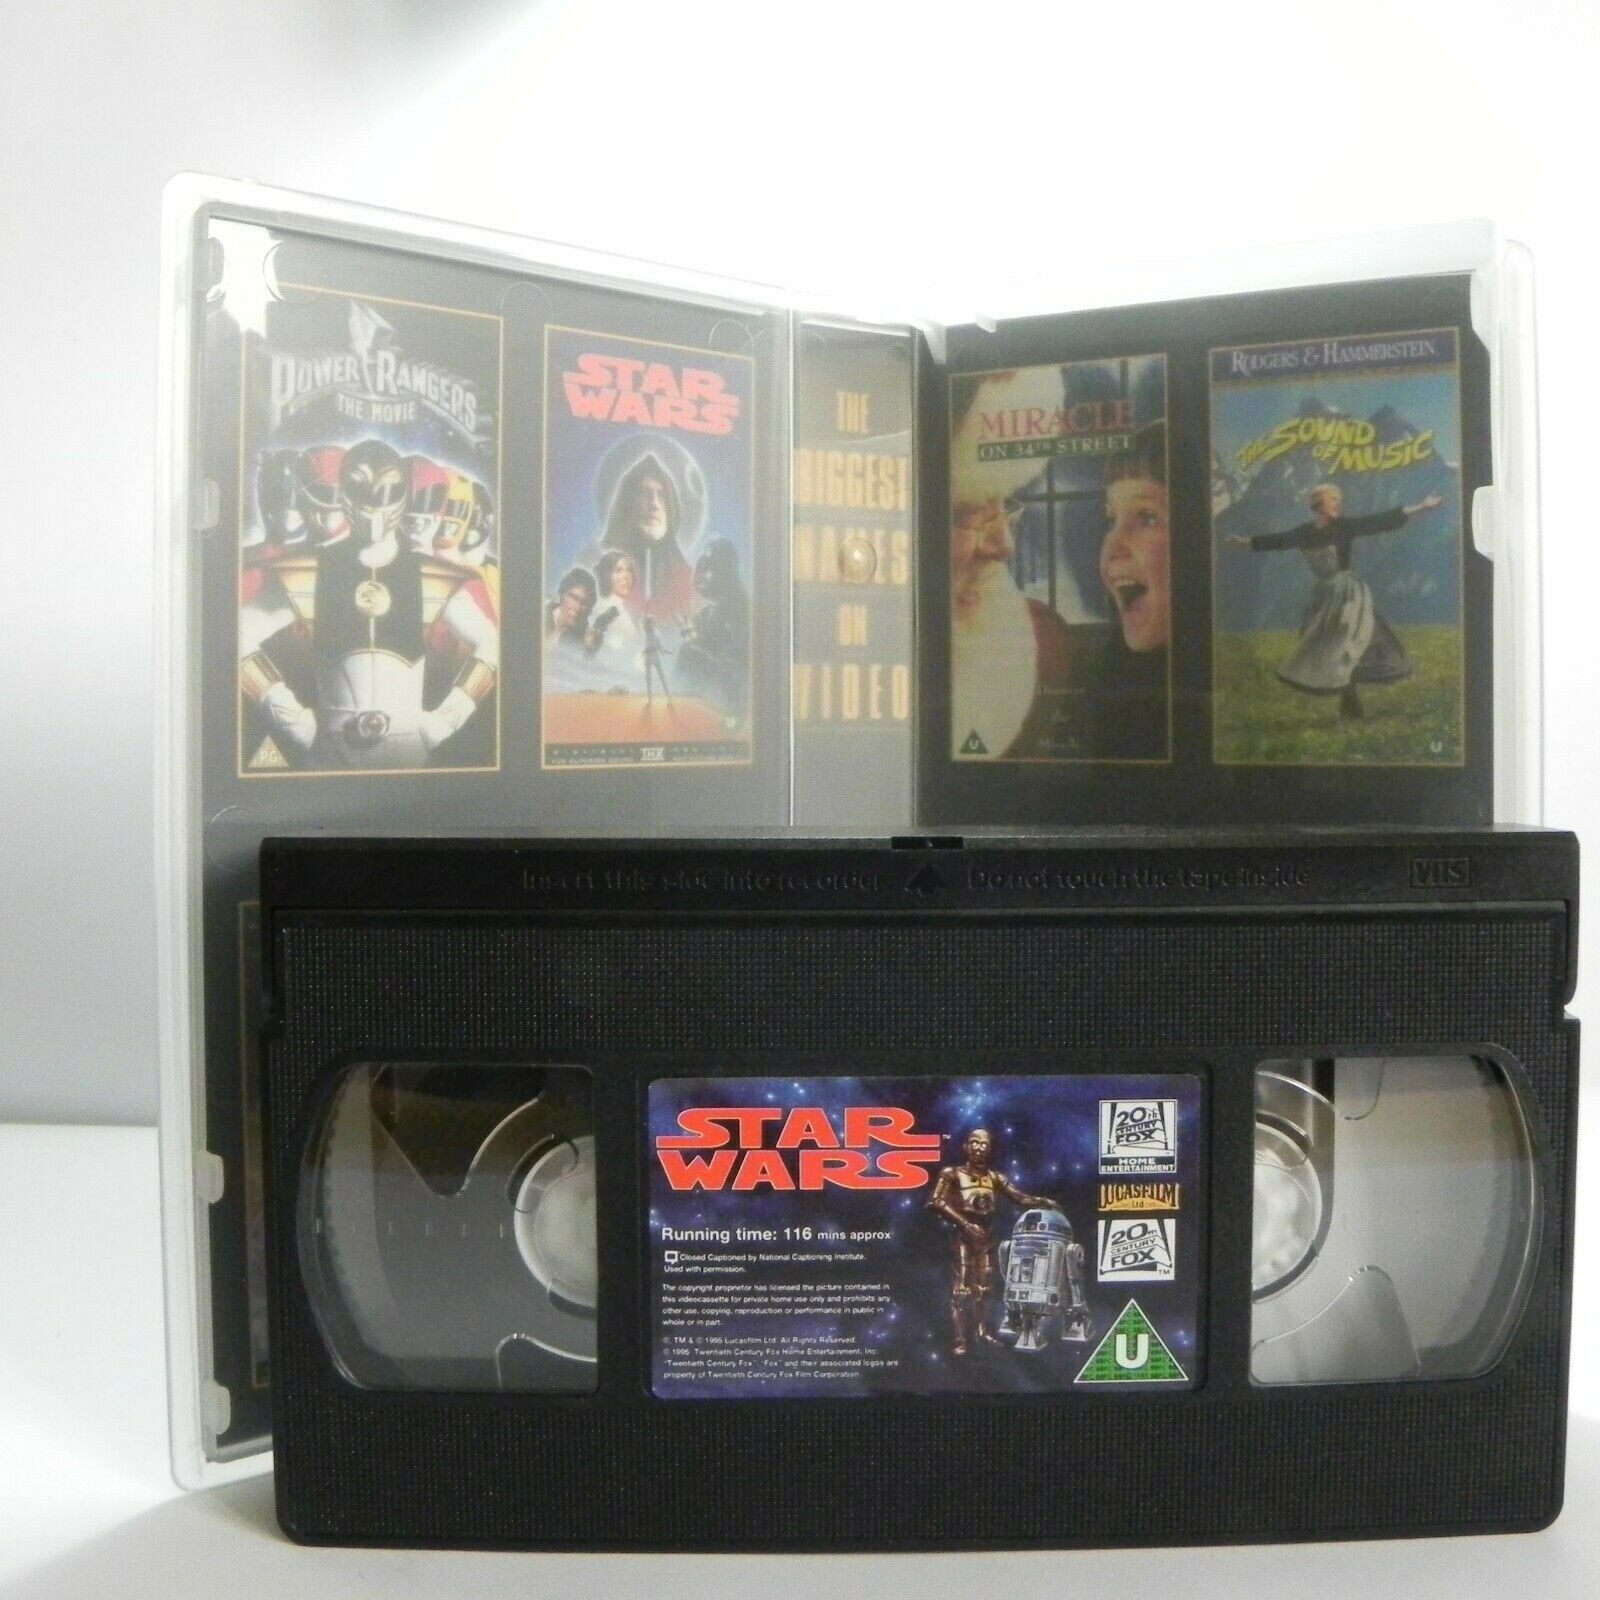 Star Wars: By G.Lucas - - Space Fantasy - Classic Adventure - Children's - VHS-